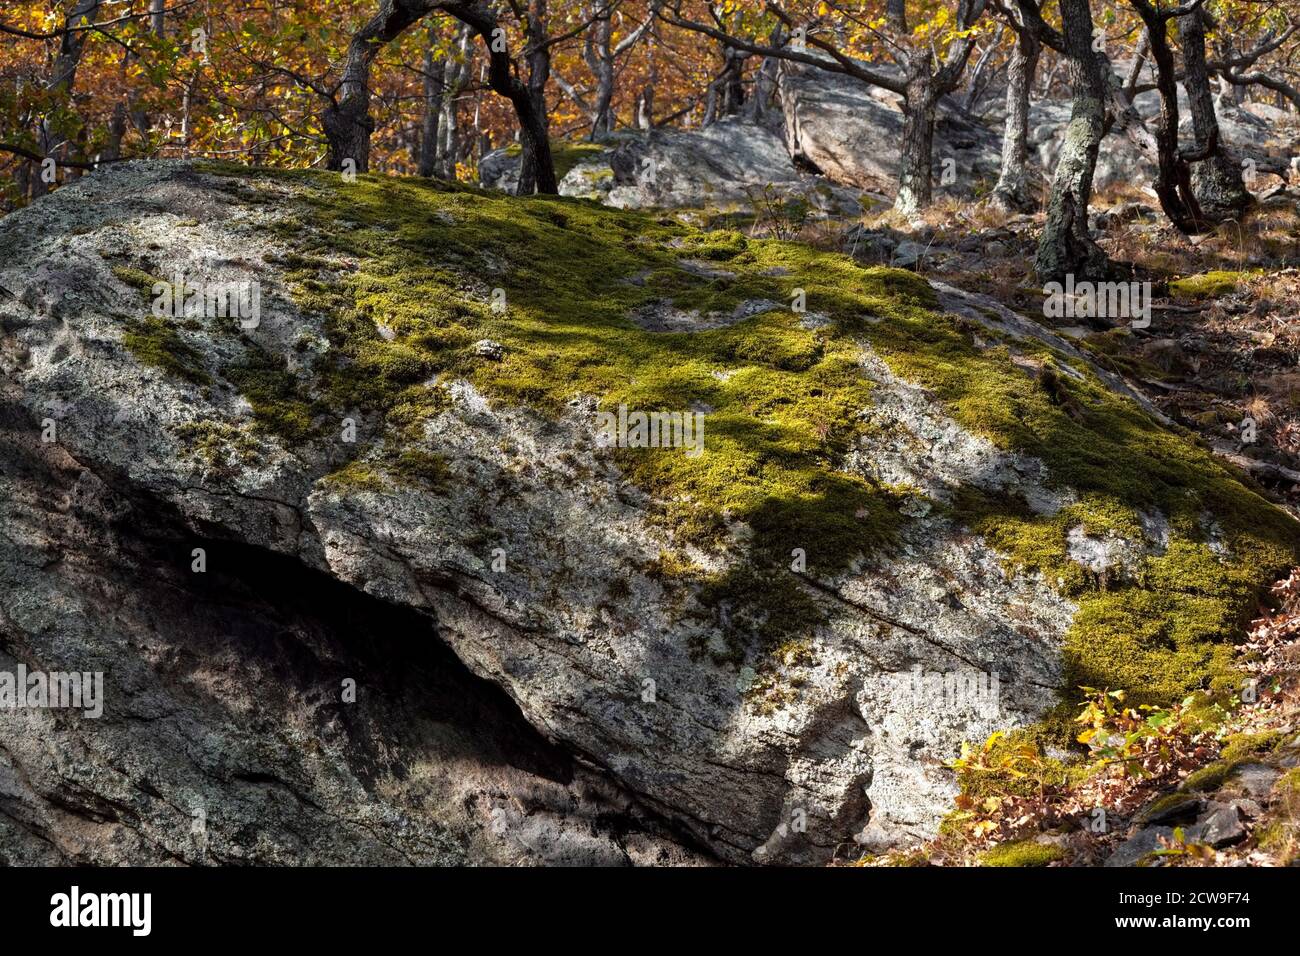 The rock covered by moss and crustose lichen Stock Photo